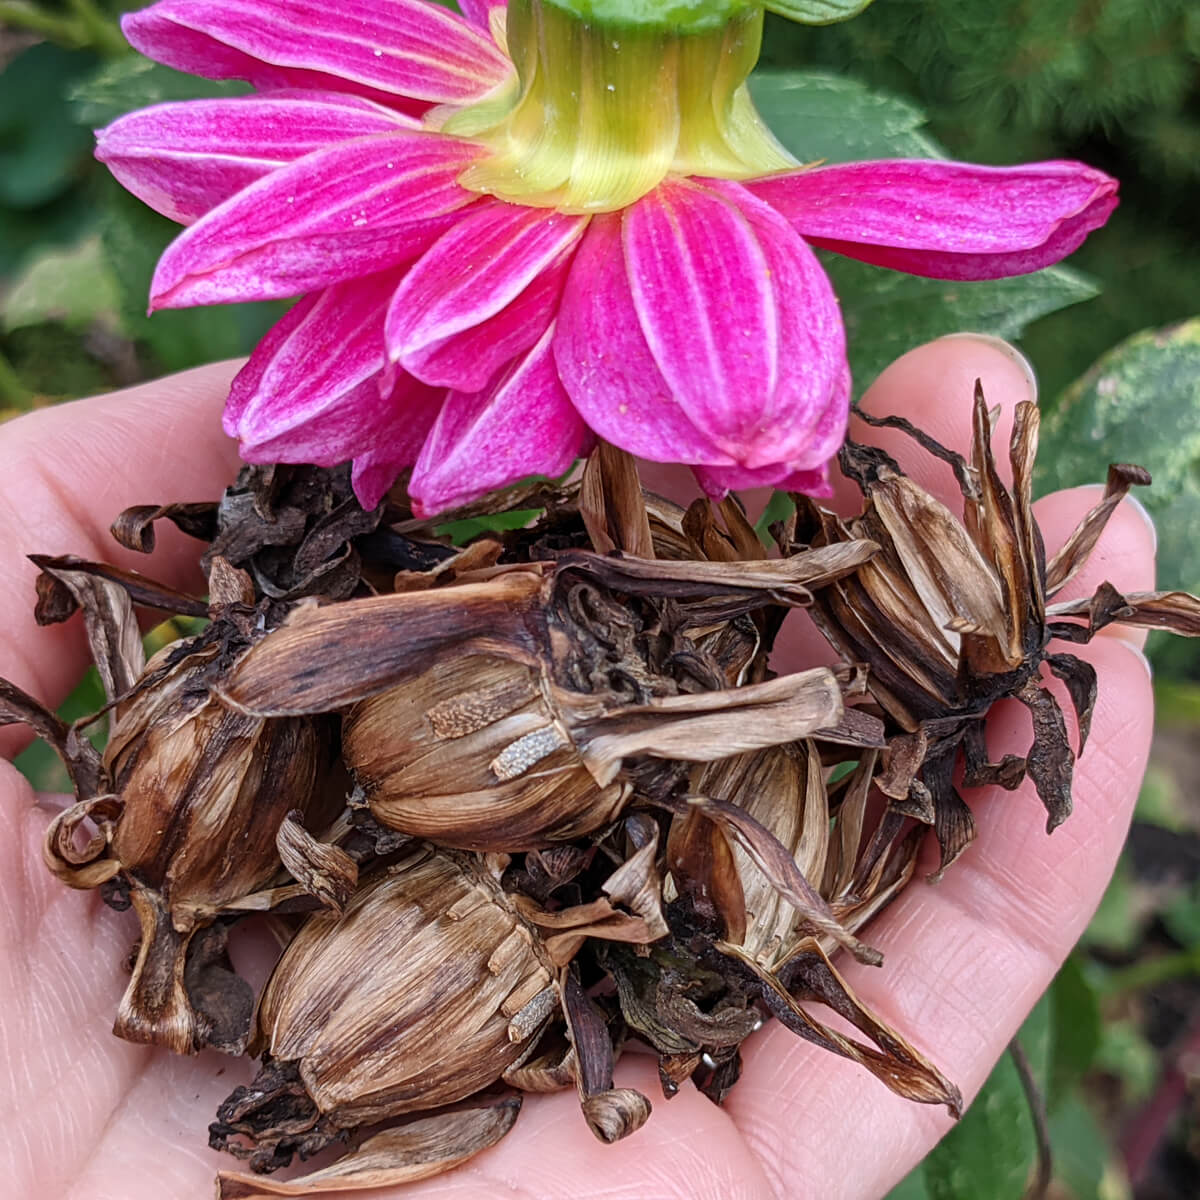 Collecting Dahlia Seeds from a Pink Dahlia, Hand Holding Brown Dahlia Seed Heads